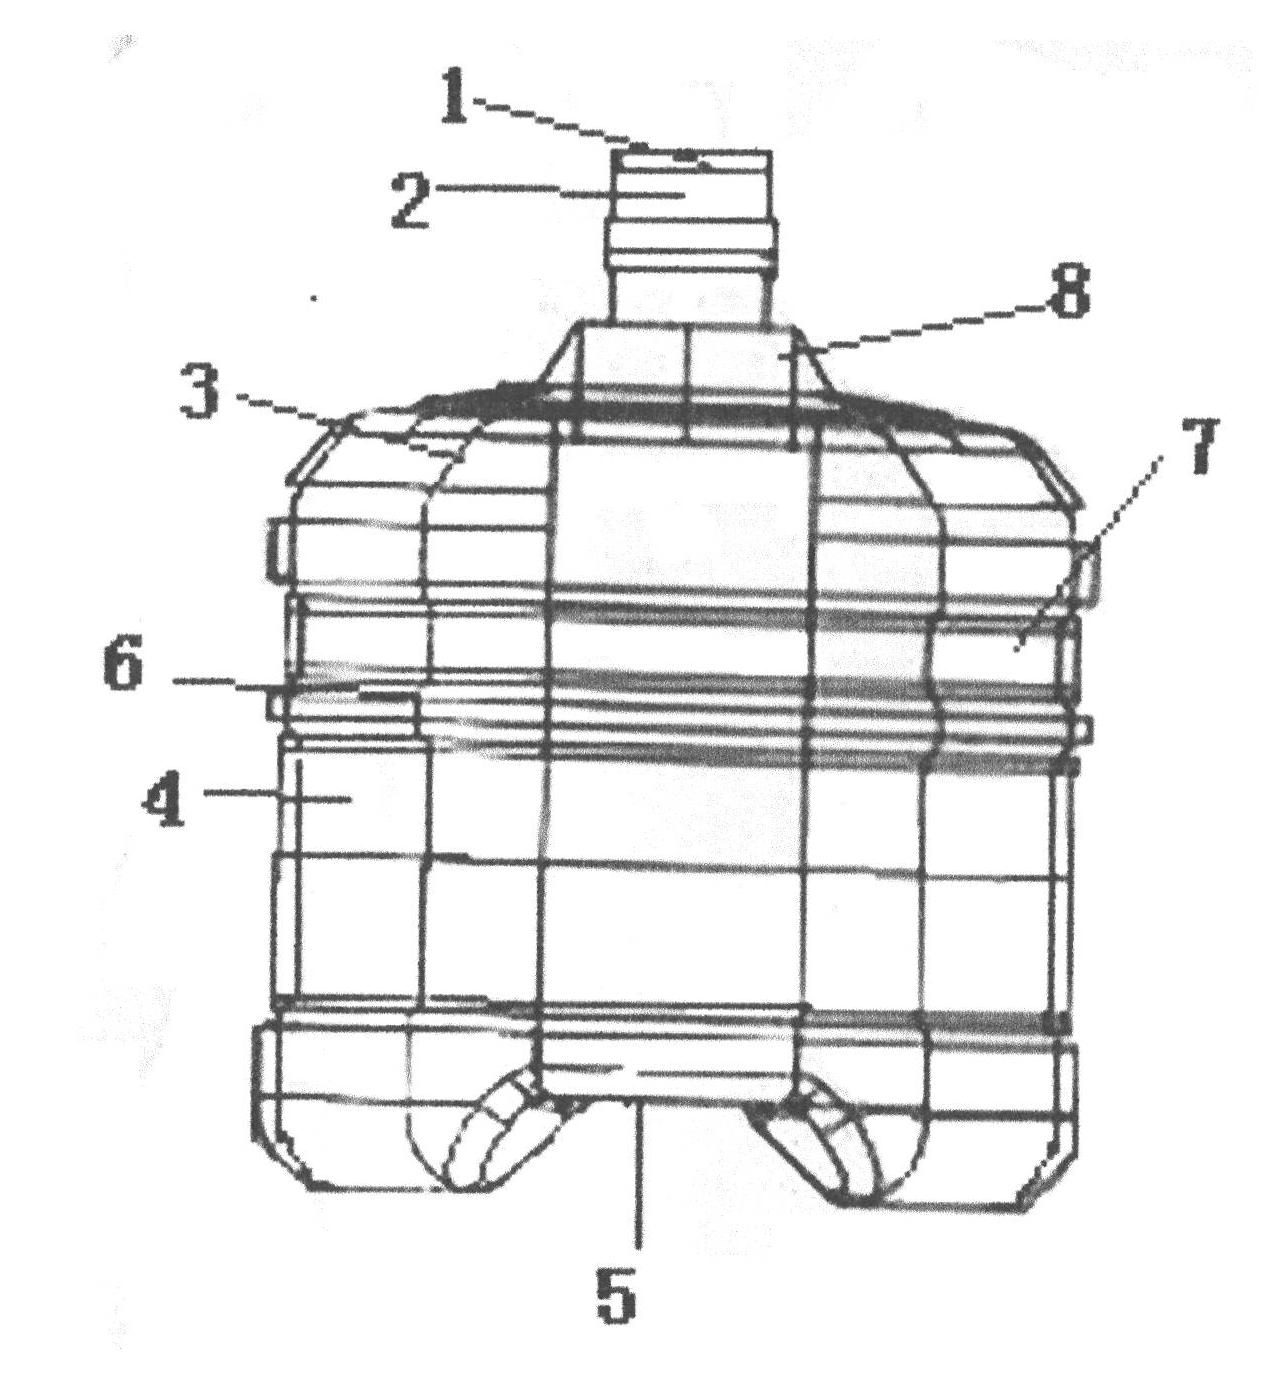 Foldable drinking water bottle and manufacturing method thereof